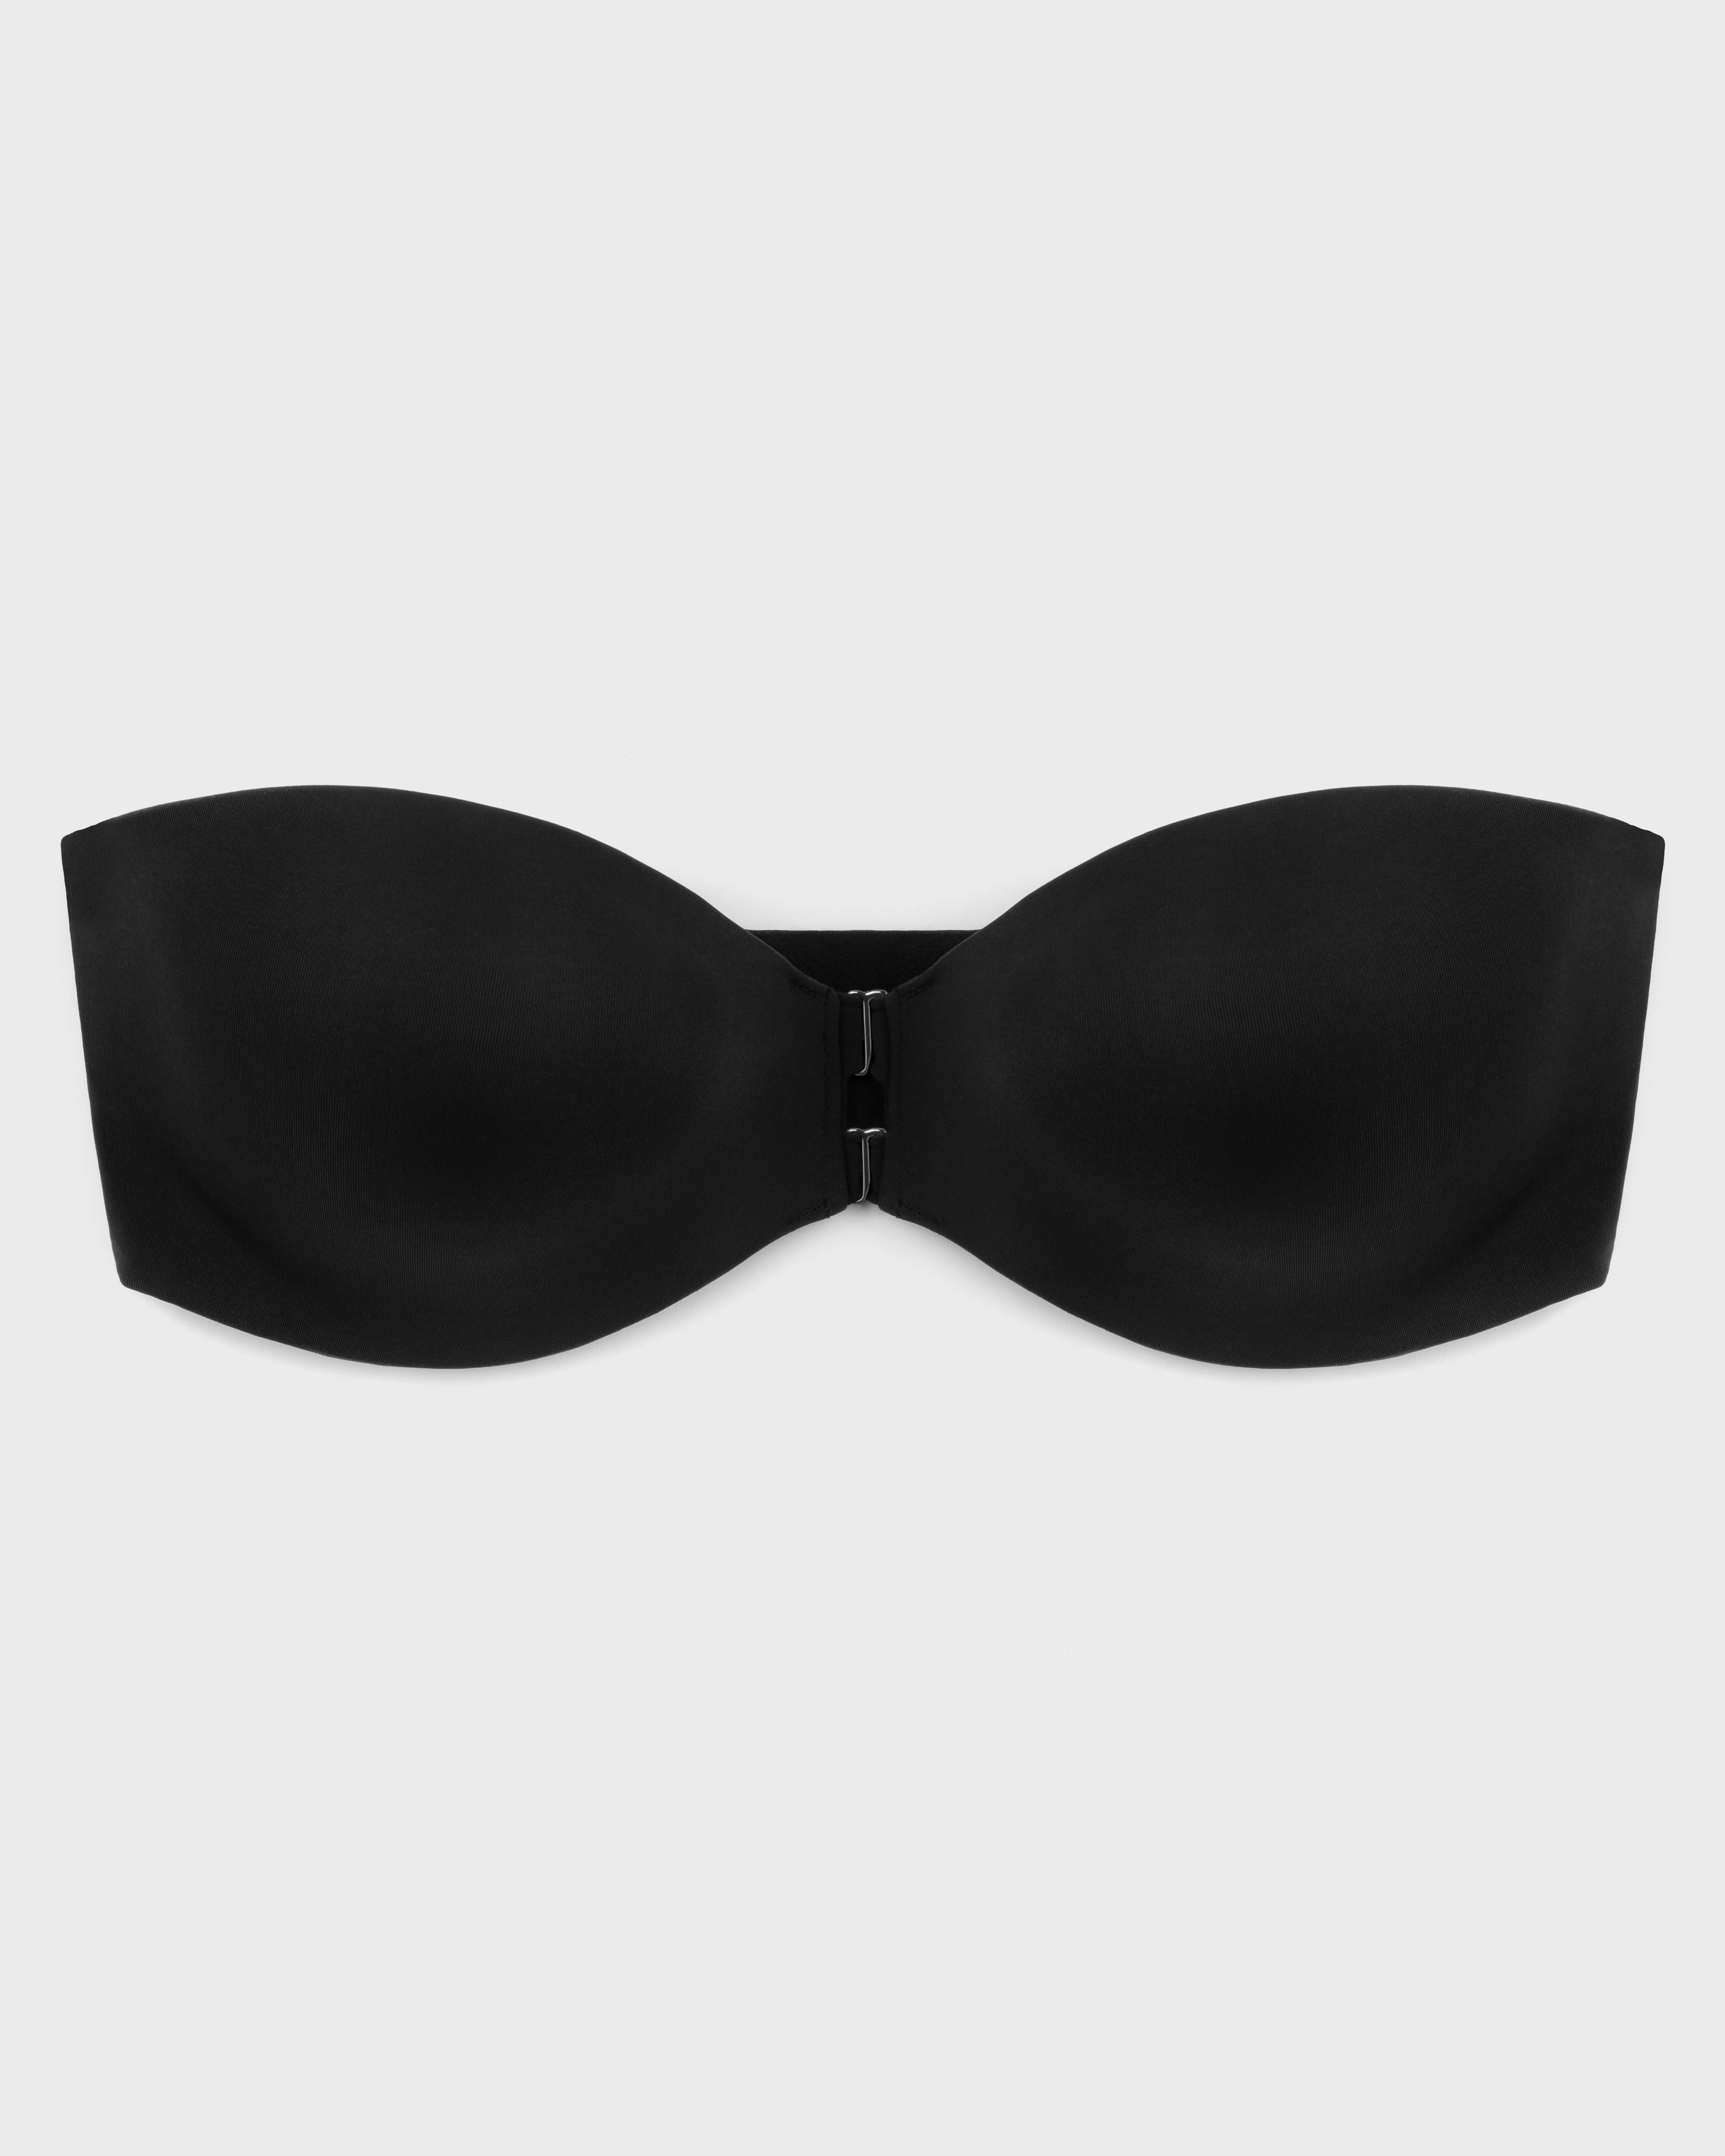 Wherewithal The EveryWhere Underwire Front Closure Strapless Bra